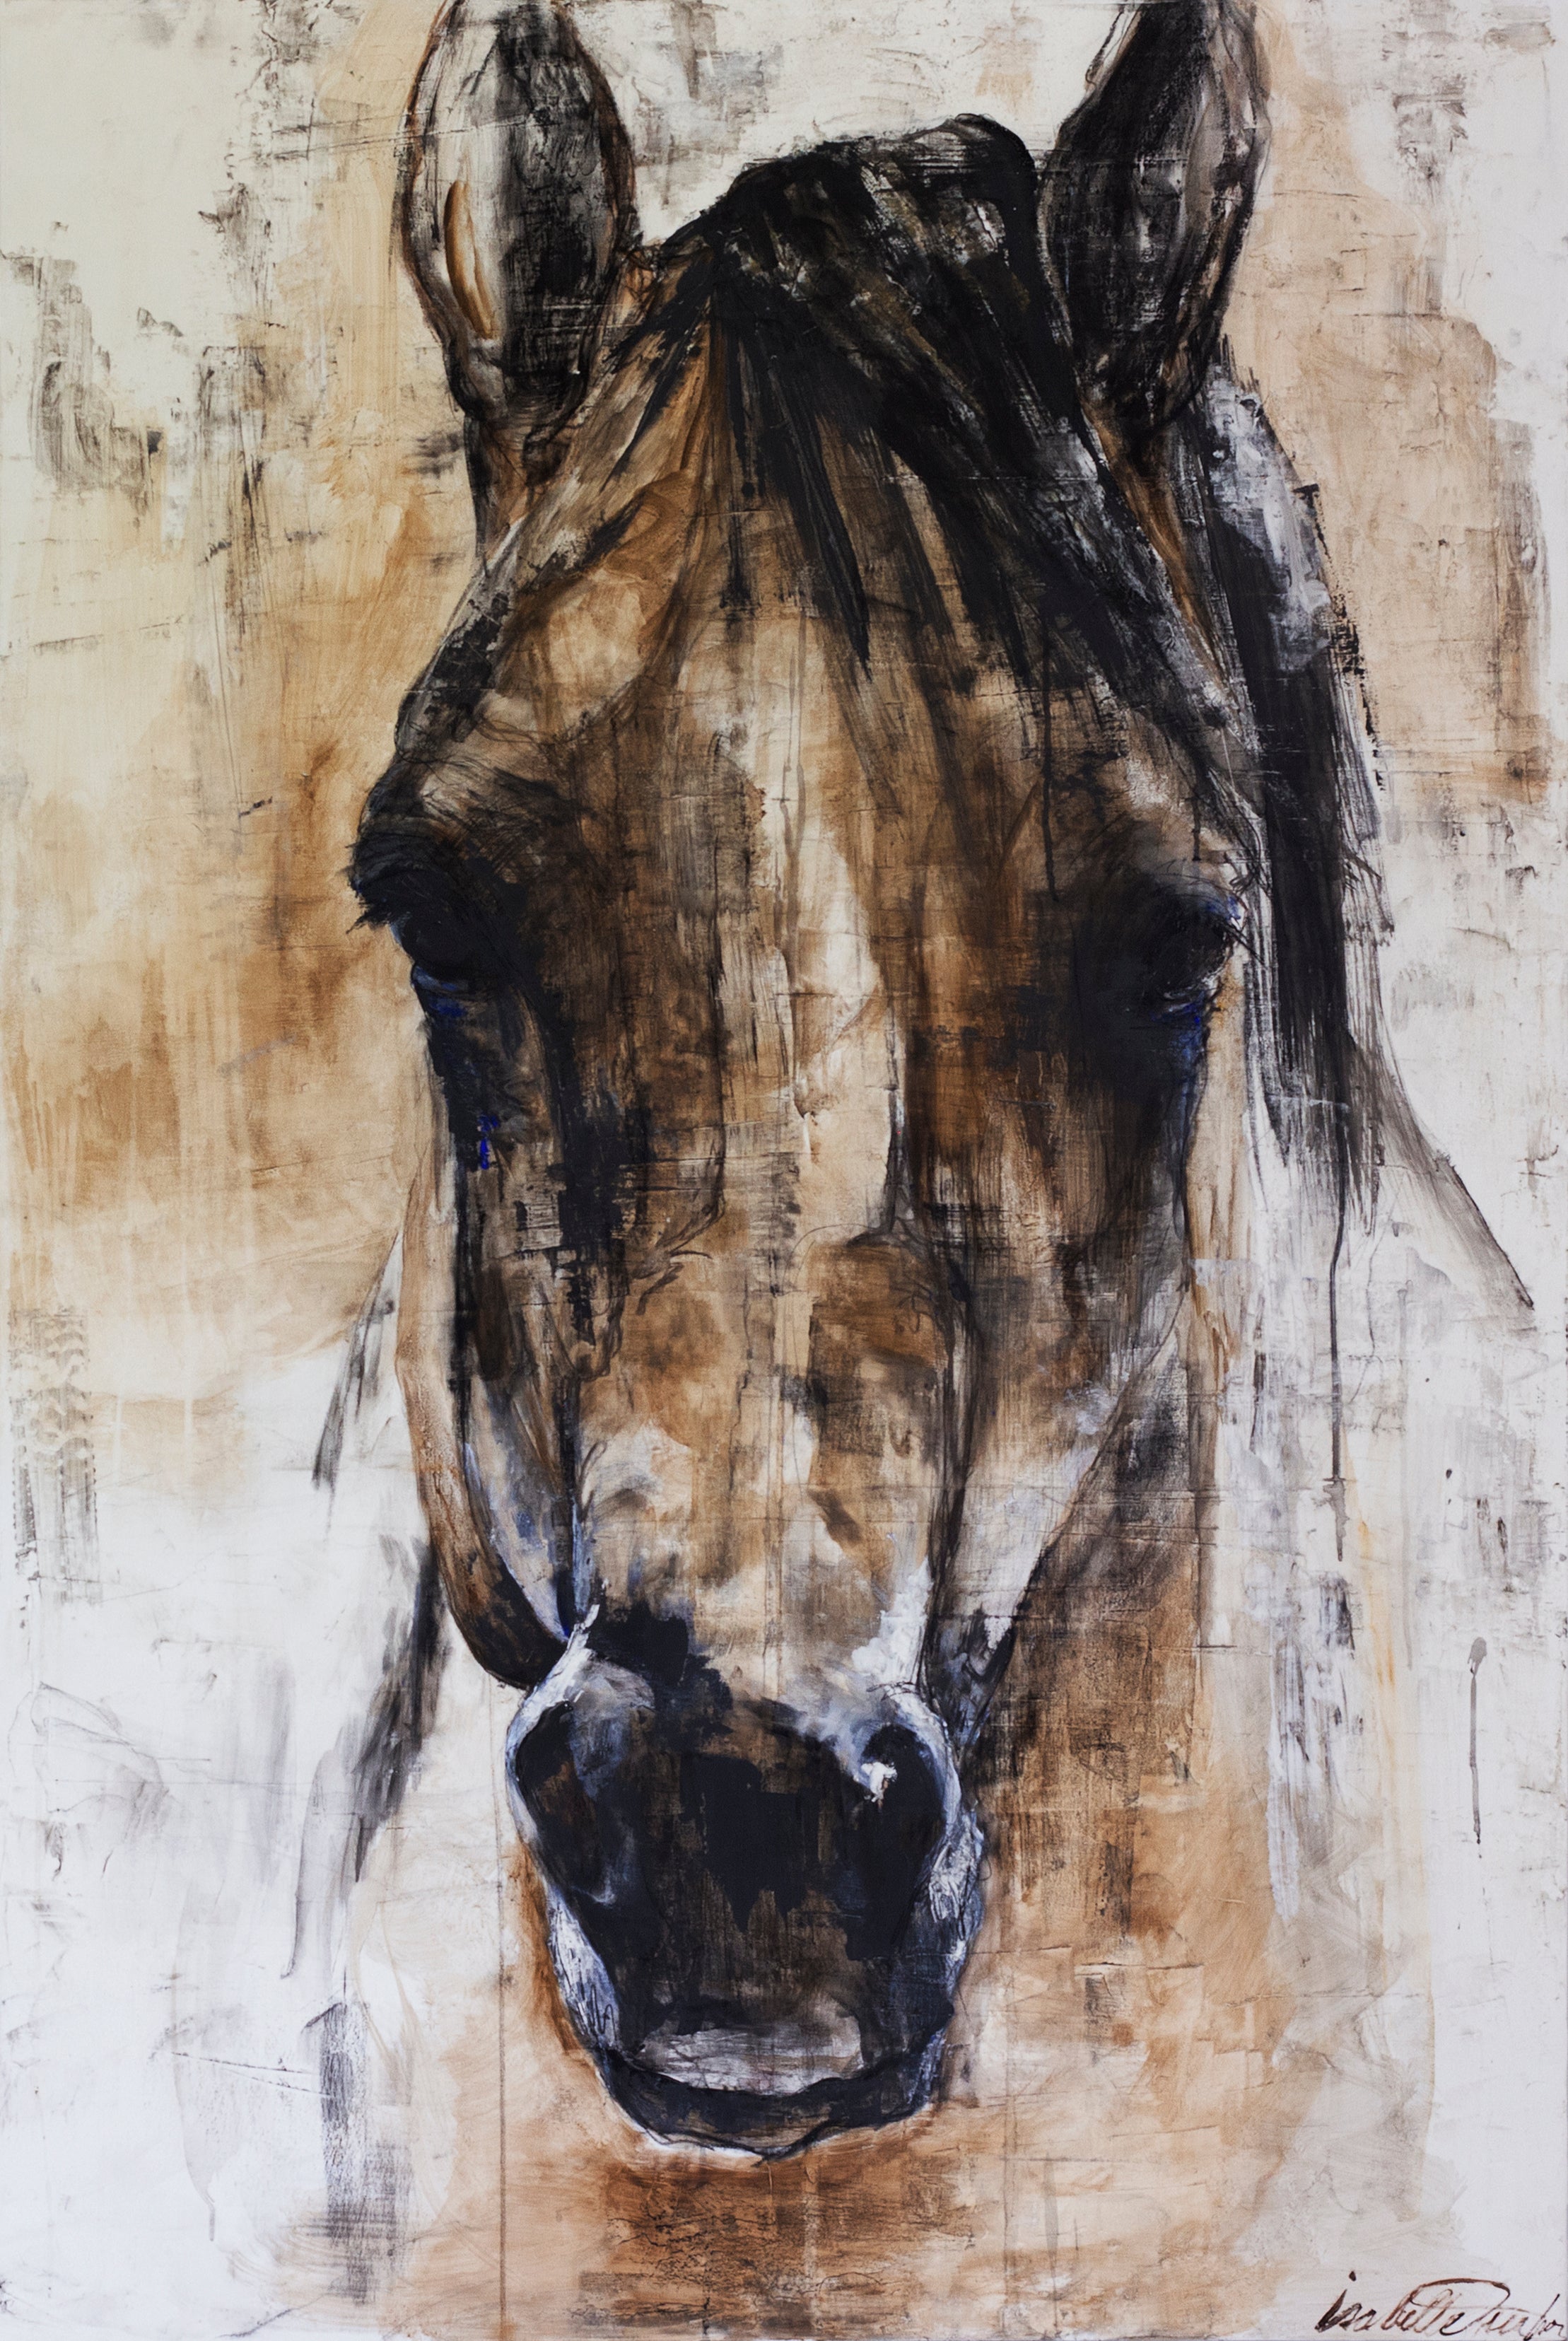 It is common knowledge that horses possess pure souls. Their reference comes from their life experience and what they may or may not have been subject to. A horse does not have the ability to lie because the truth is the only thing it understands.  This is an original painting of a wild Kiger Mustang from Oregon's Steen Mountain Wilderness, by artist  Isabelle Truchon